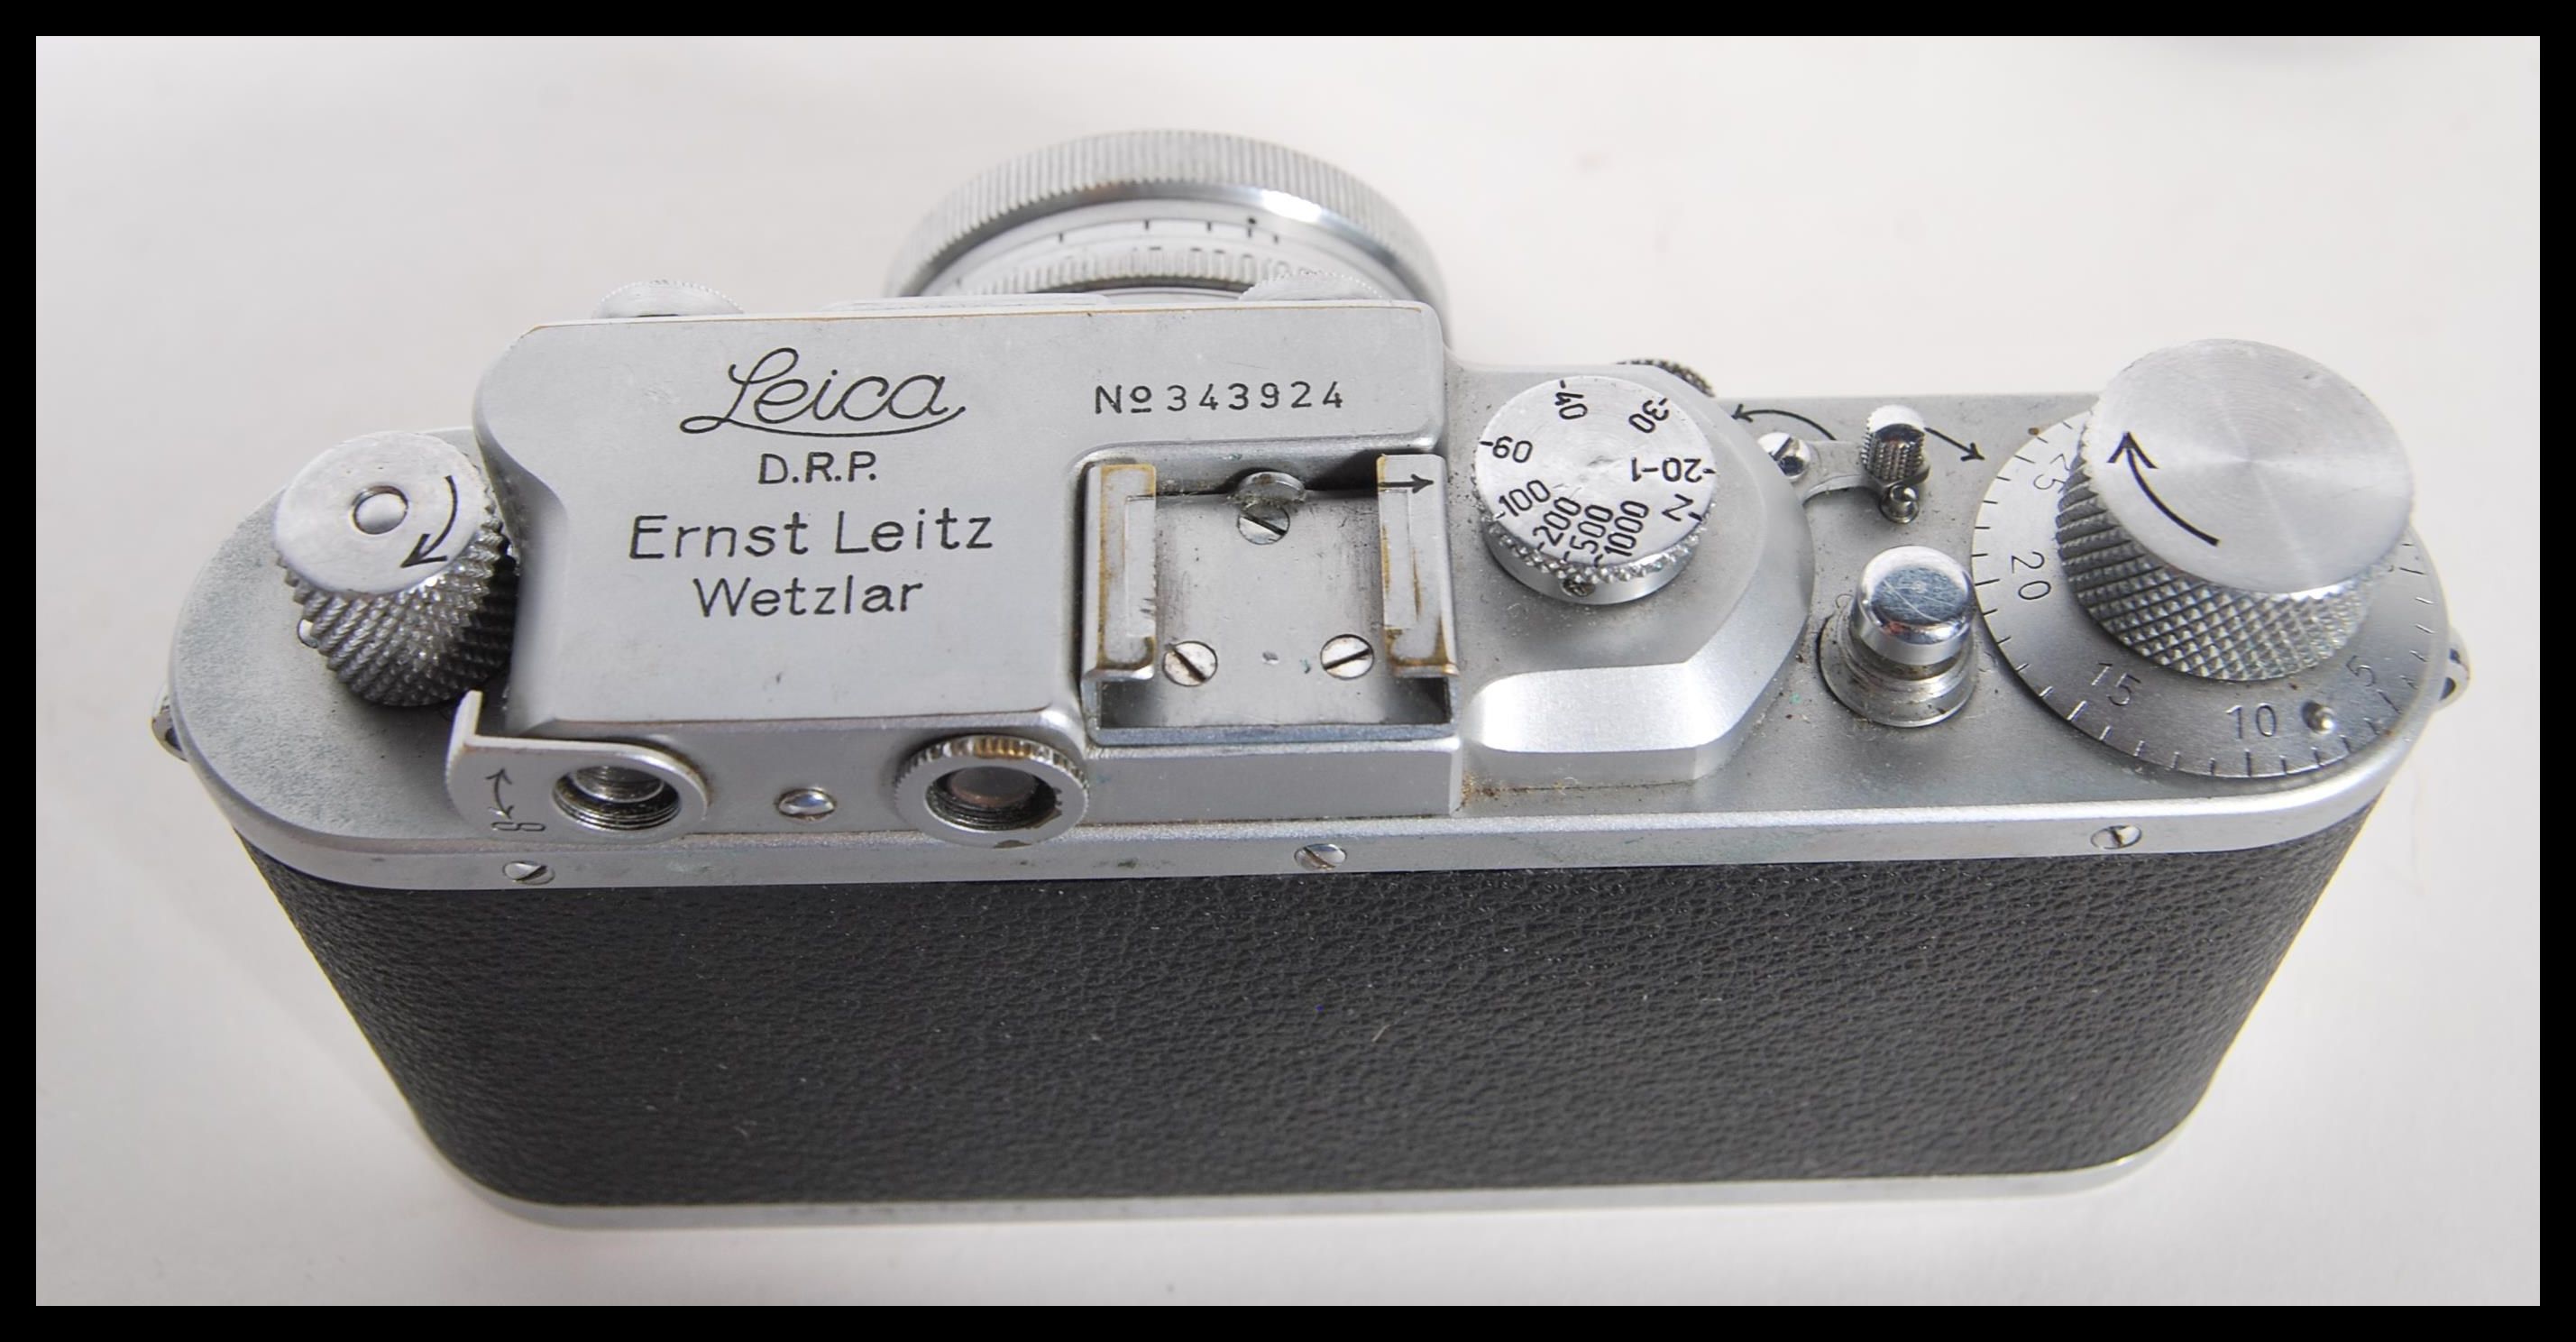 A Leica lll D.P.R Rangefinder chrome camera by Ernst Leitz Wetzlar Germany, Serial number 343924. - Image 4 of 7